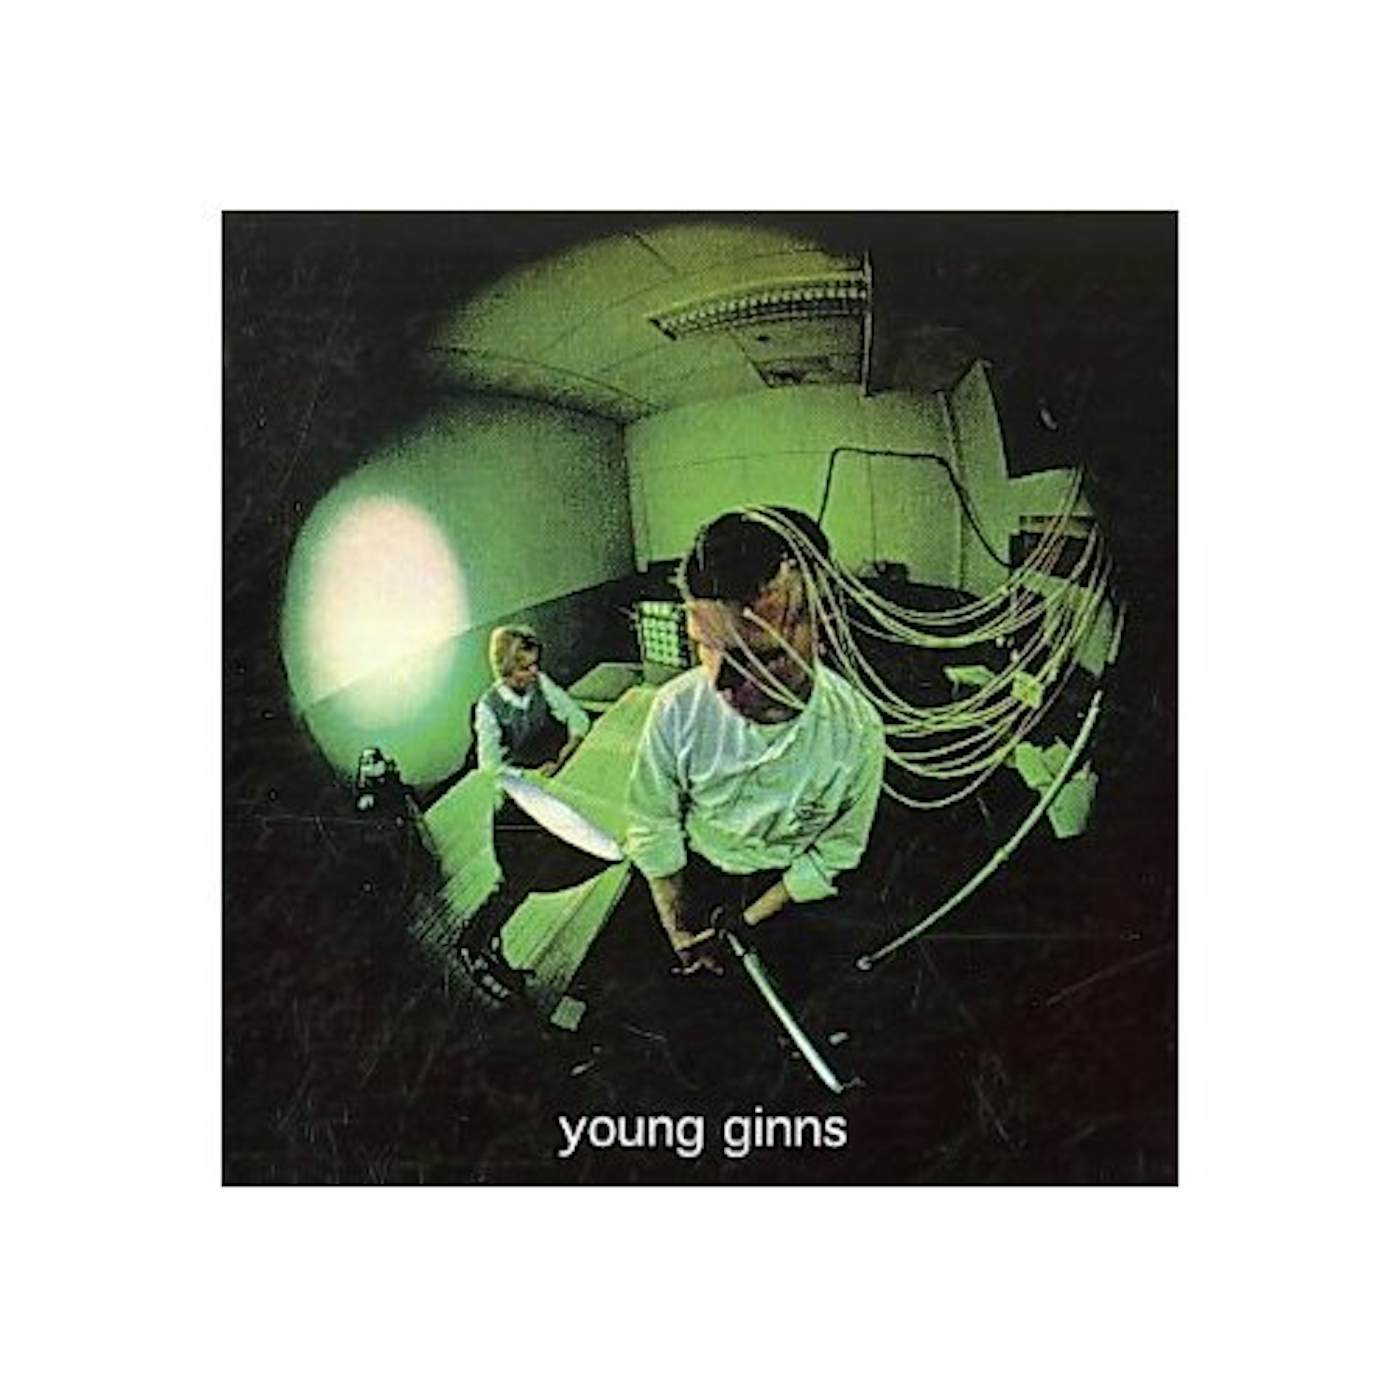 YOUNG GINNS CD